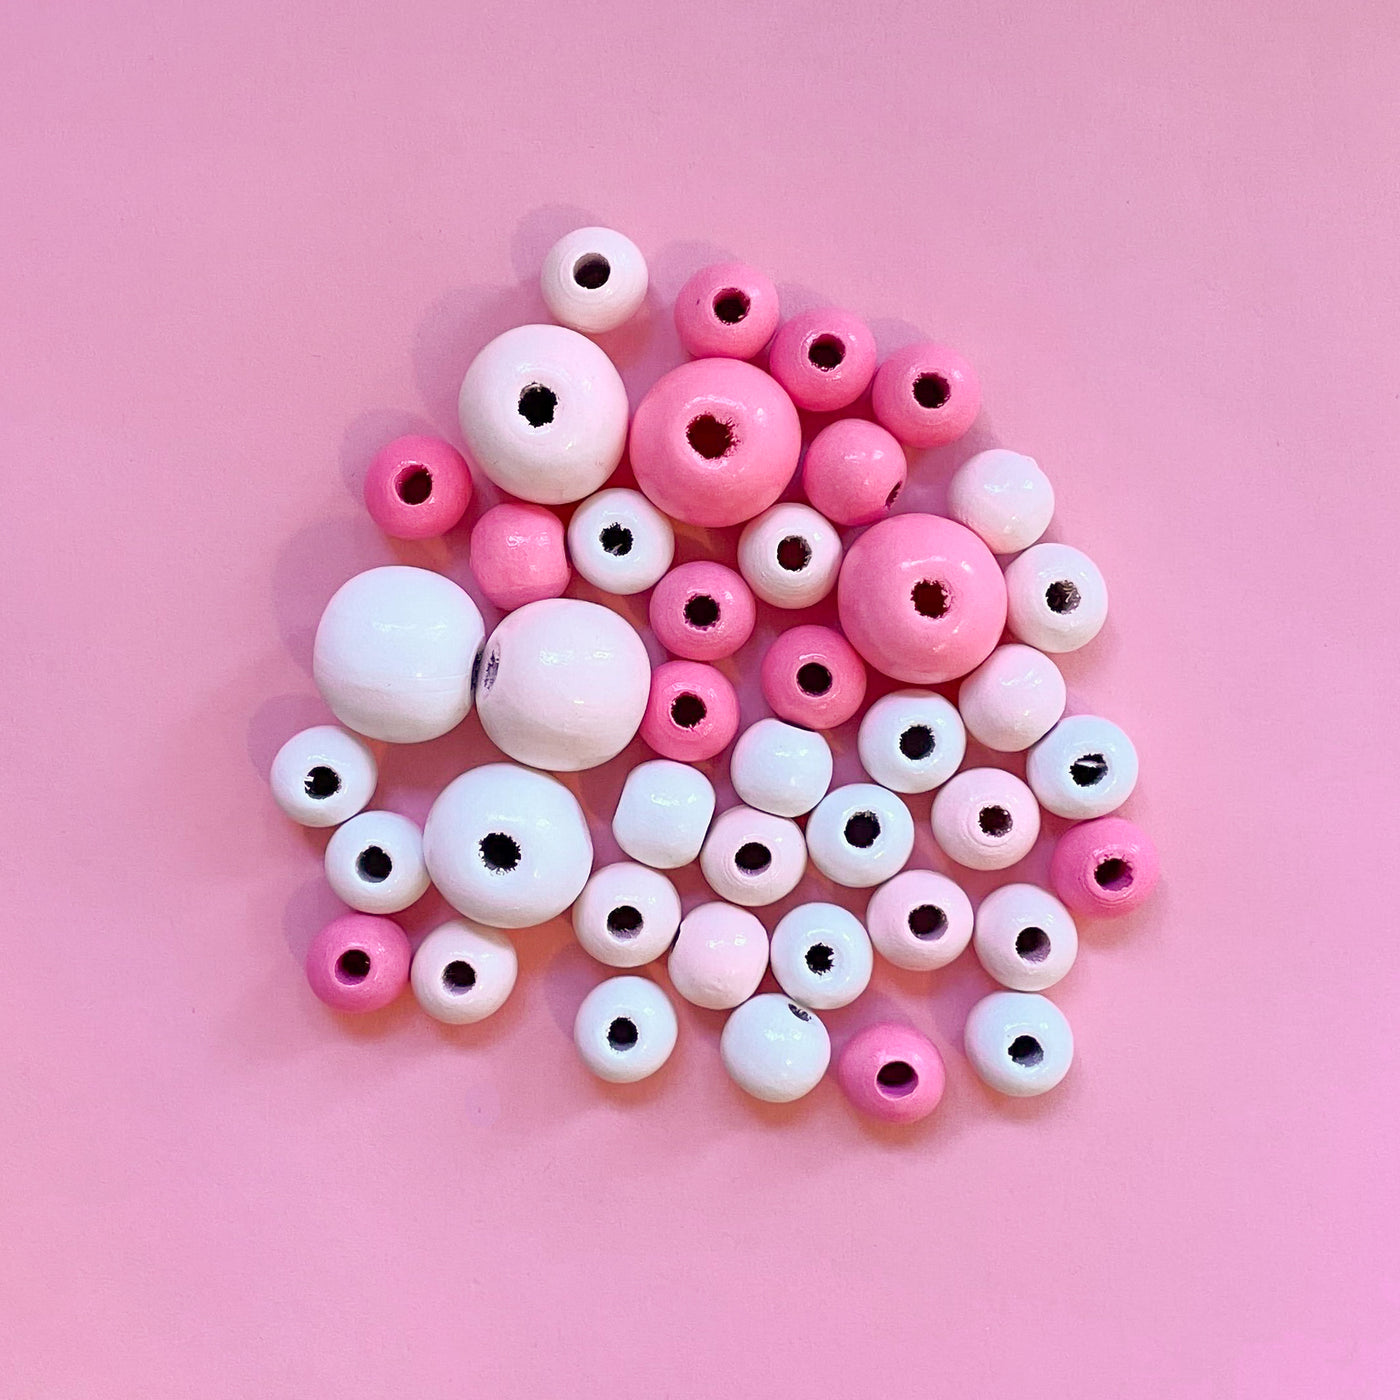 Painted Wood Beads – Pink Medley (42 pieces)